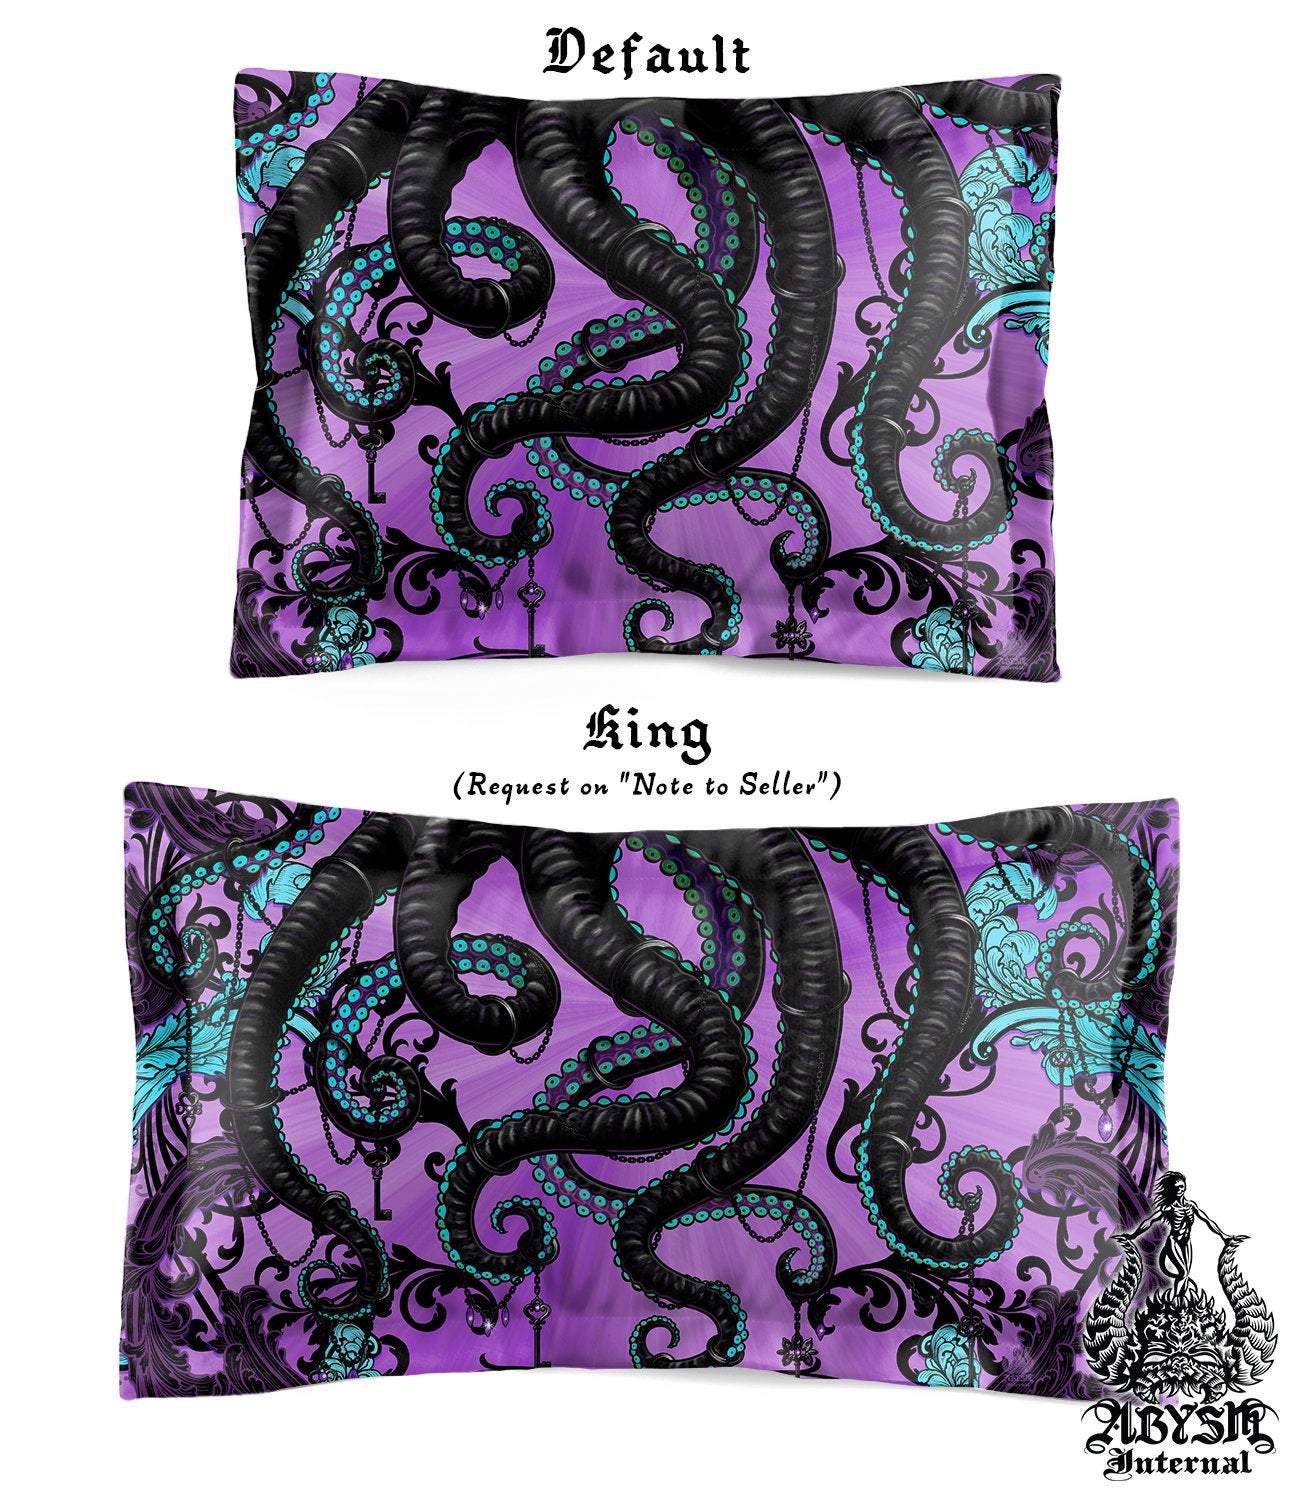 Pastel Goth Bedding Set, Comforter and Duvet, Black Octopus, Gothic Bed Cover and Beach Bedroom Decor, King, Queen and Twin Size - Purple - Abysm Internal